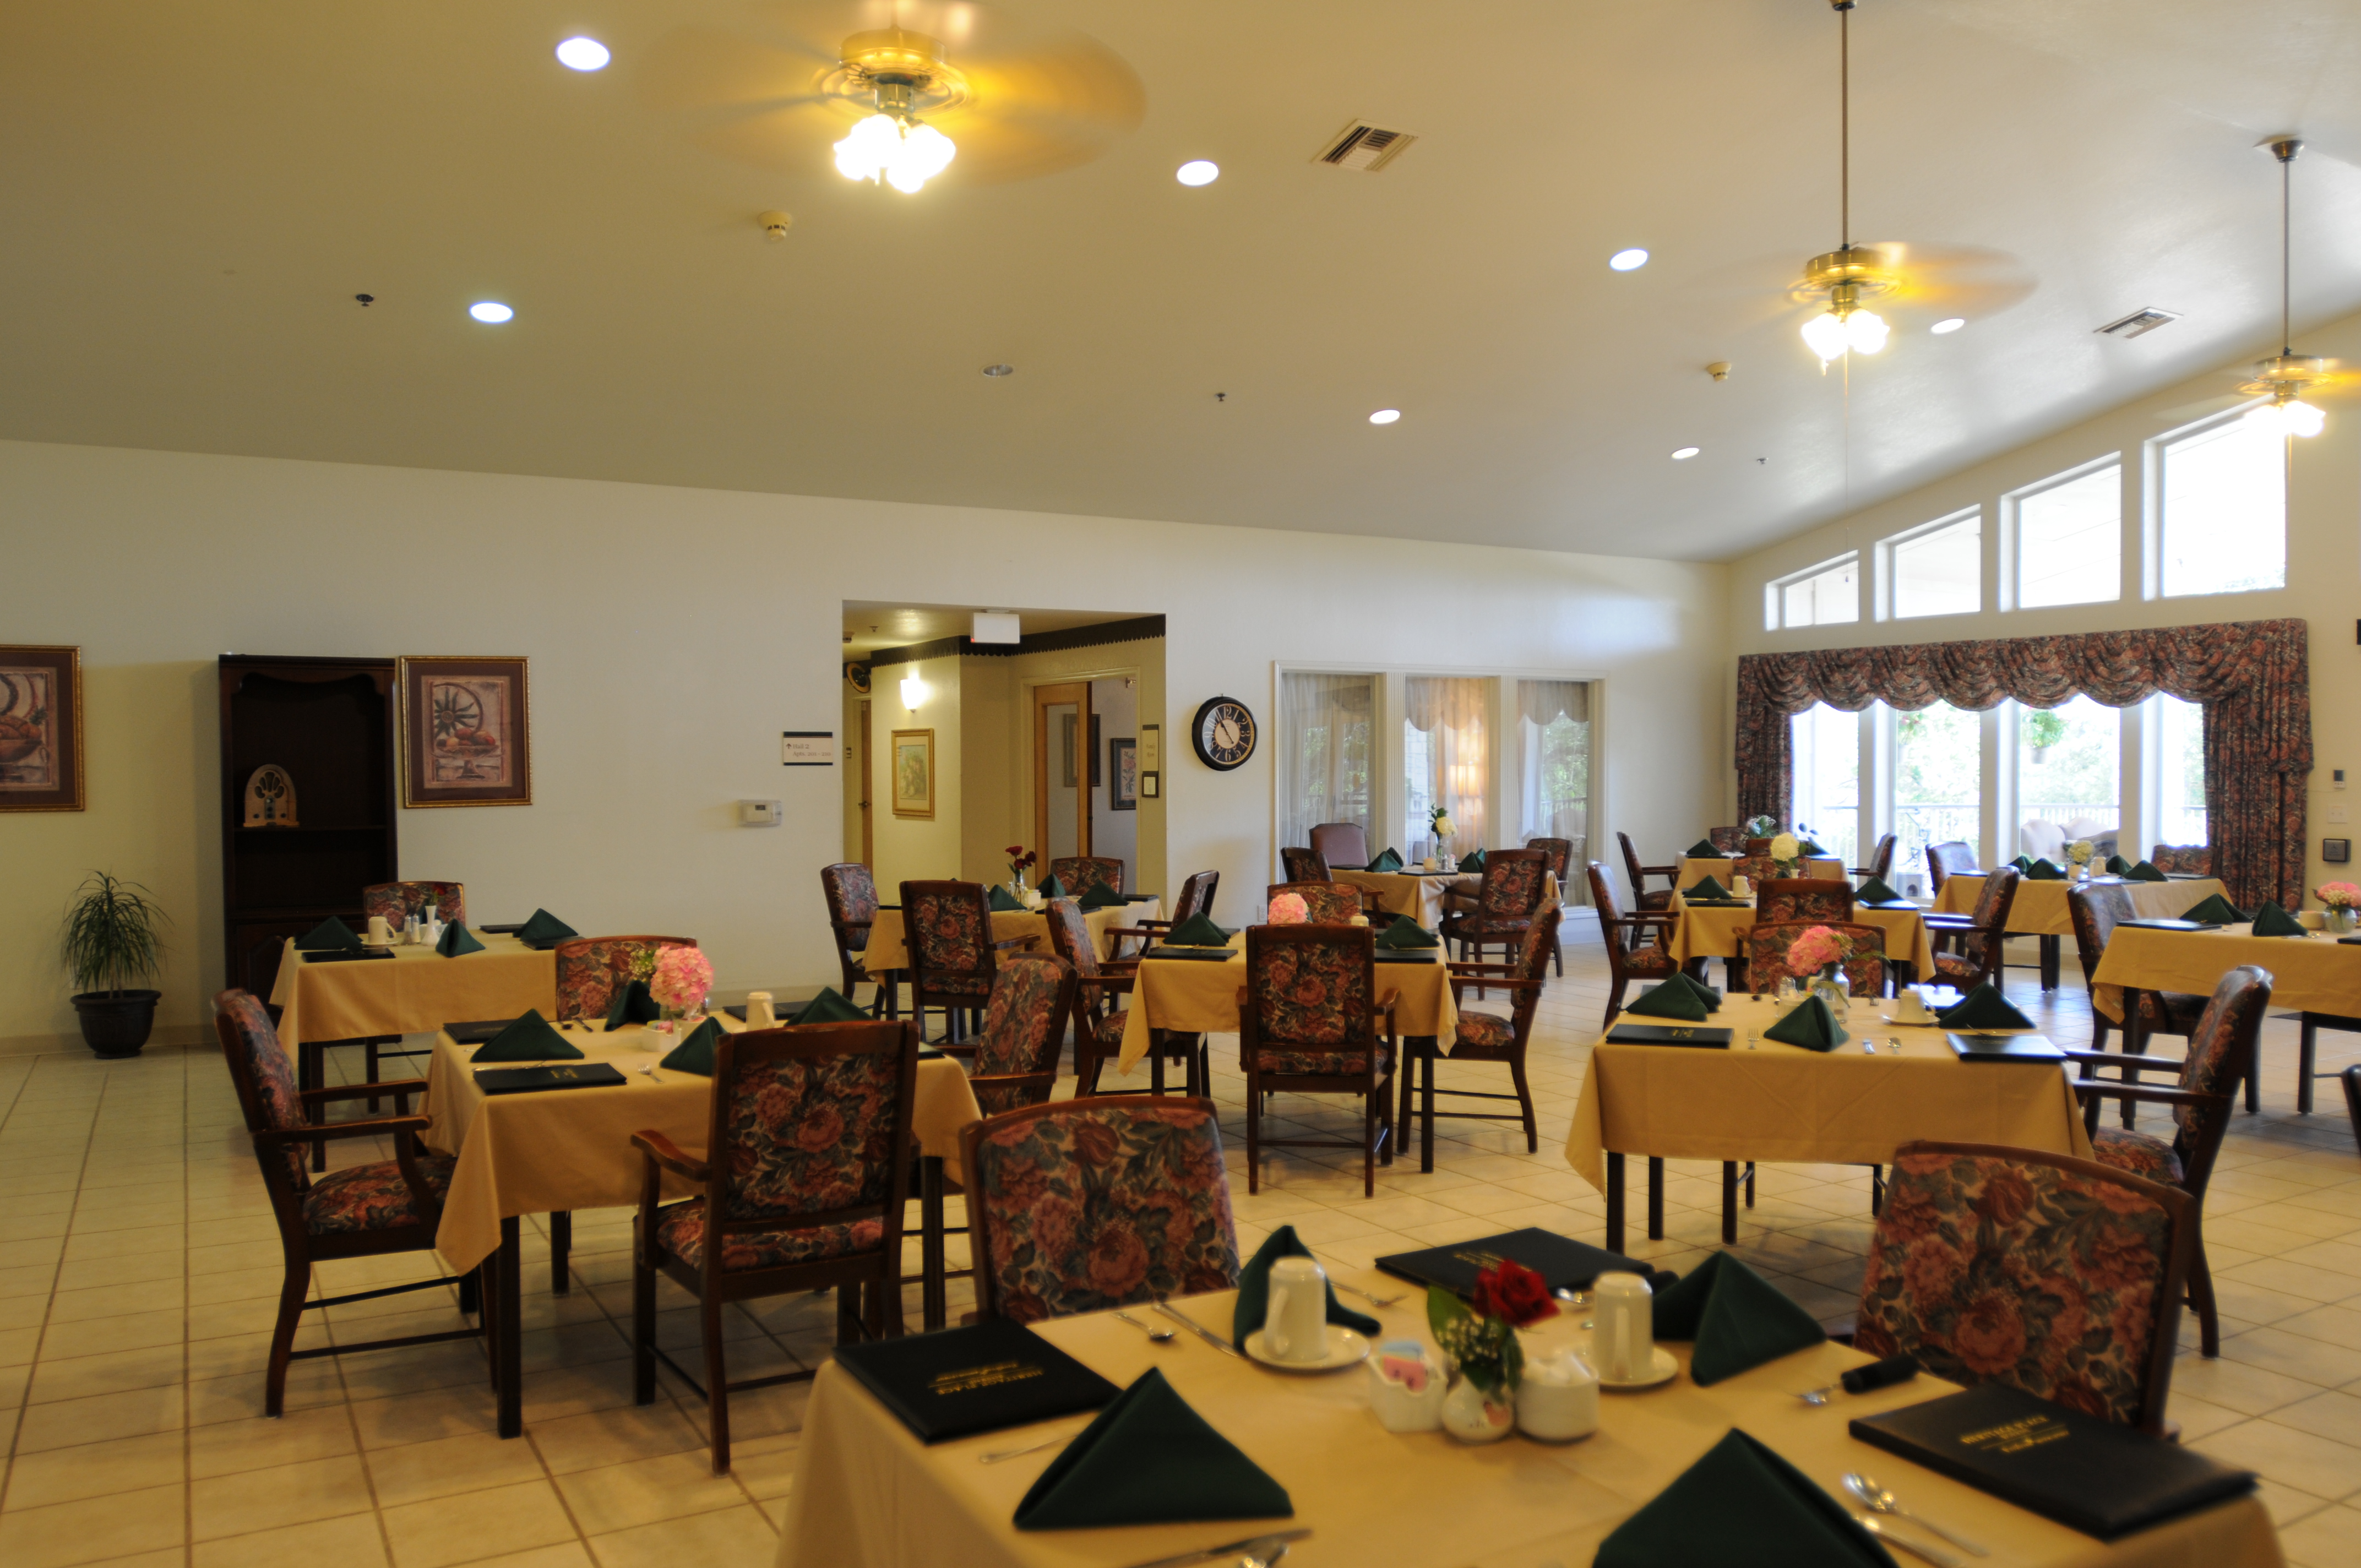 Heritage Place at Boerne boasts a spacious dining area for our seniors!